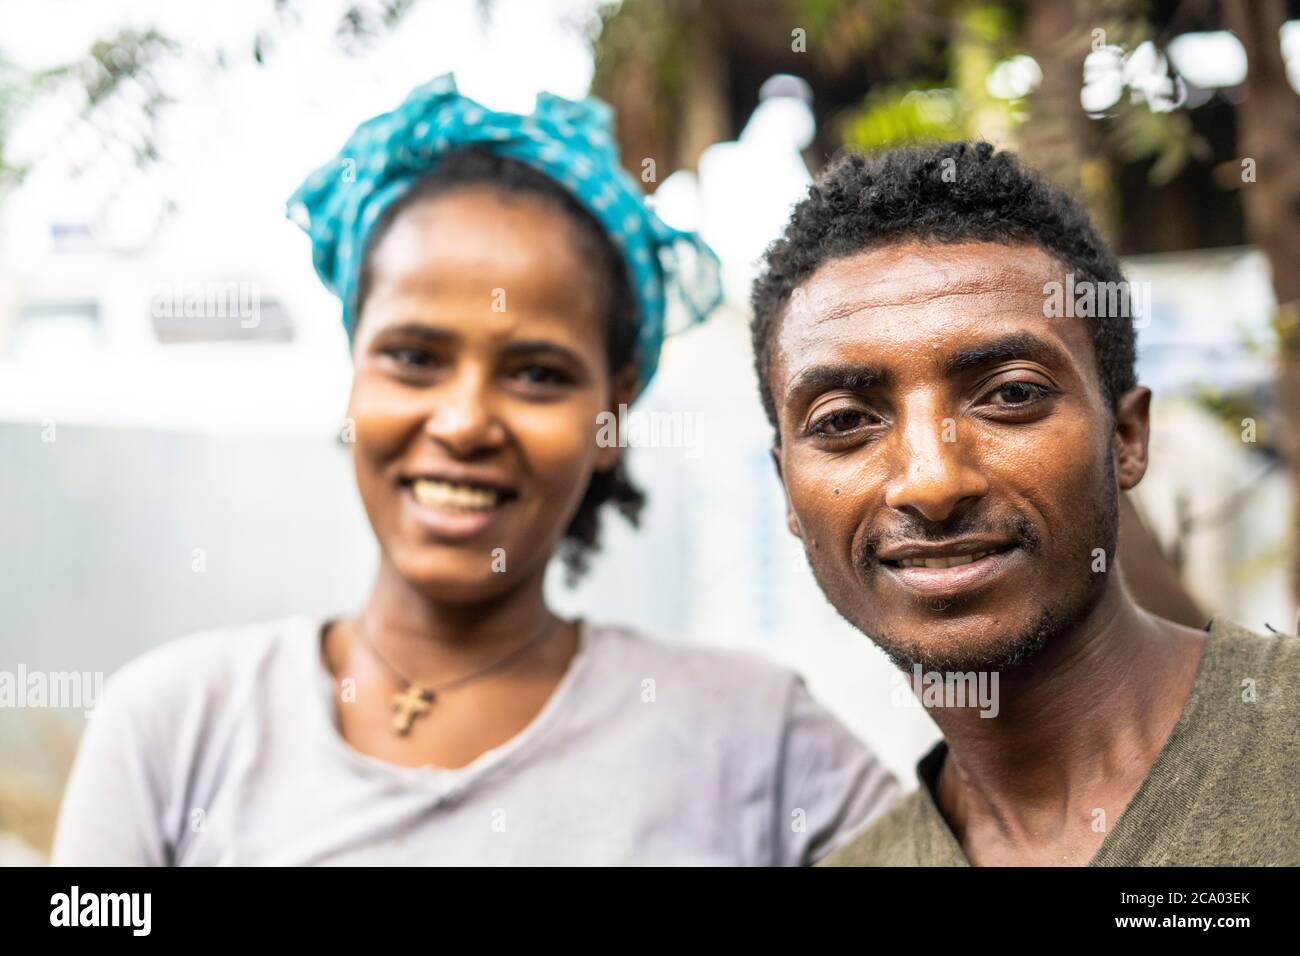 Portrait of young smiling man and woman, Berhale, Afar Region, Ethiopia, Africa Stock Photo